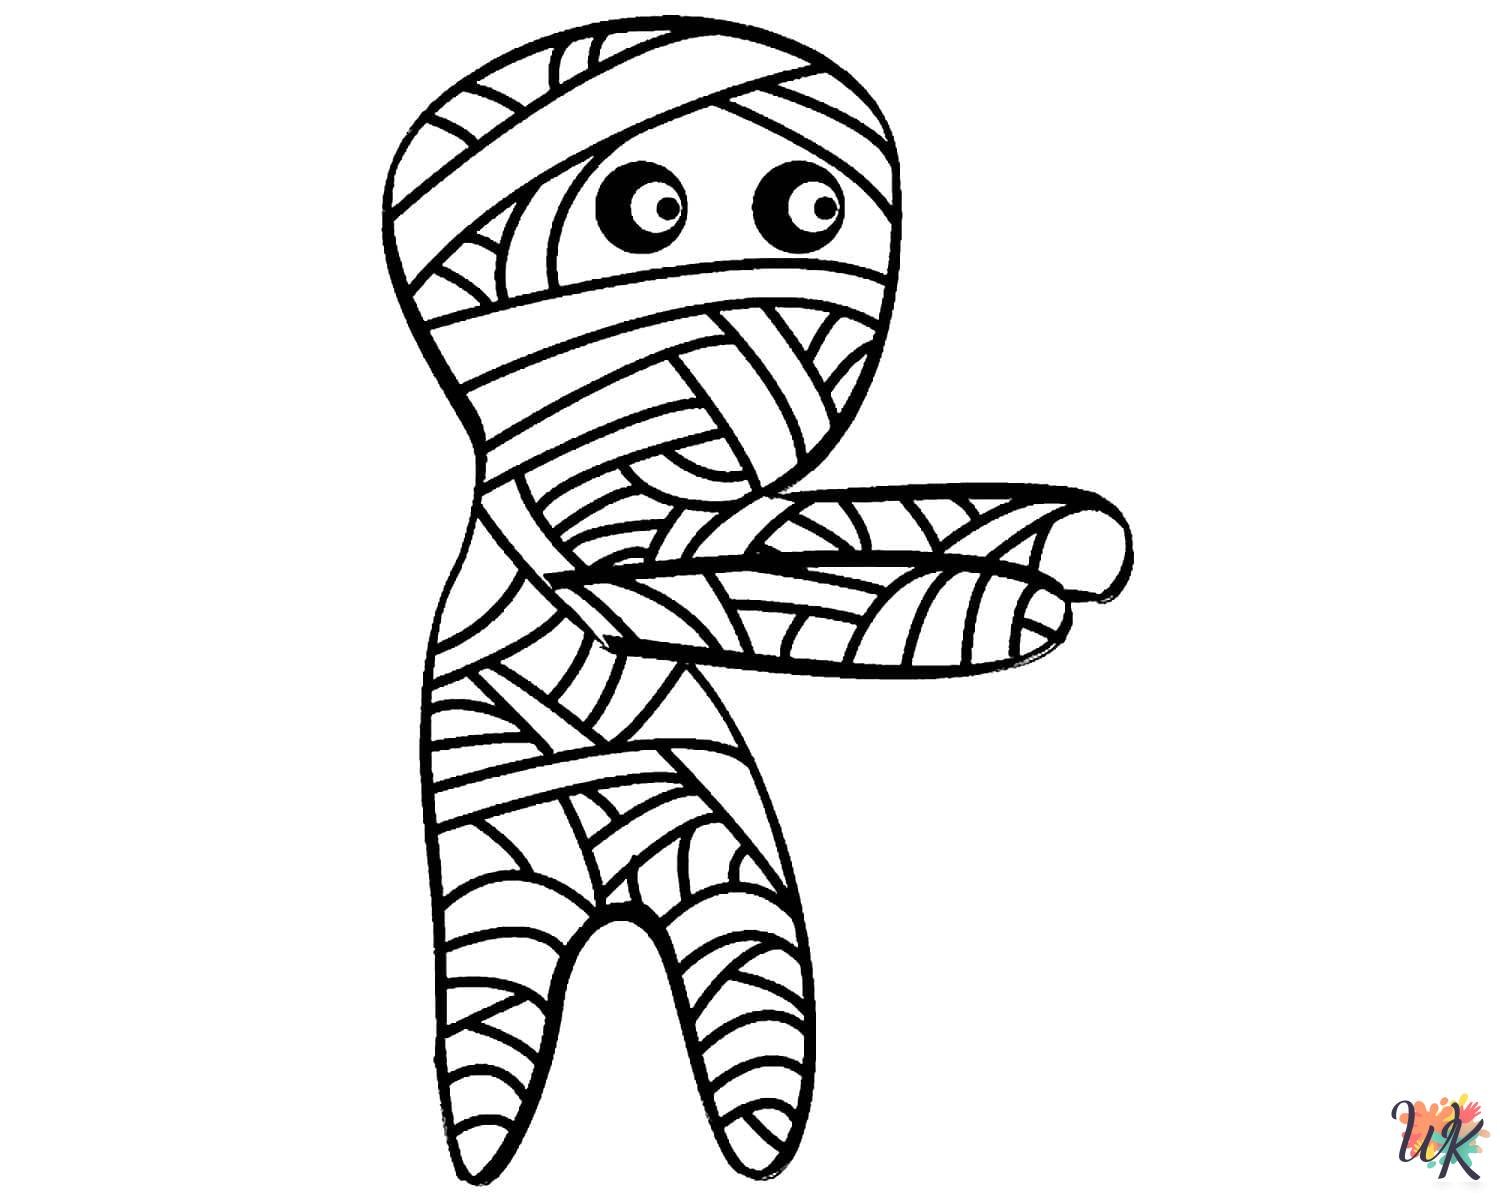 Mummy coloring pages for adults